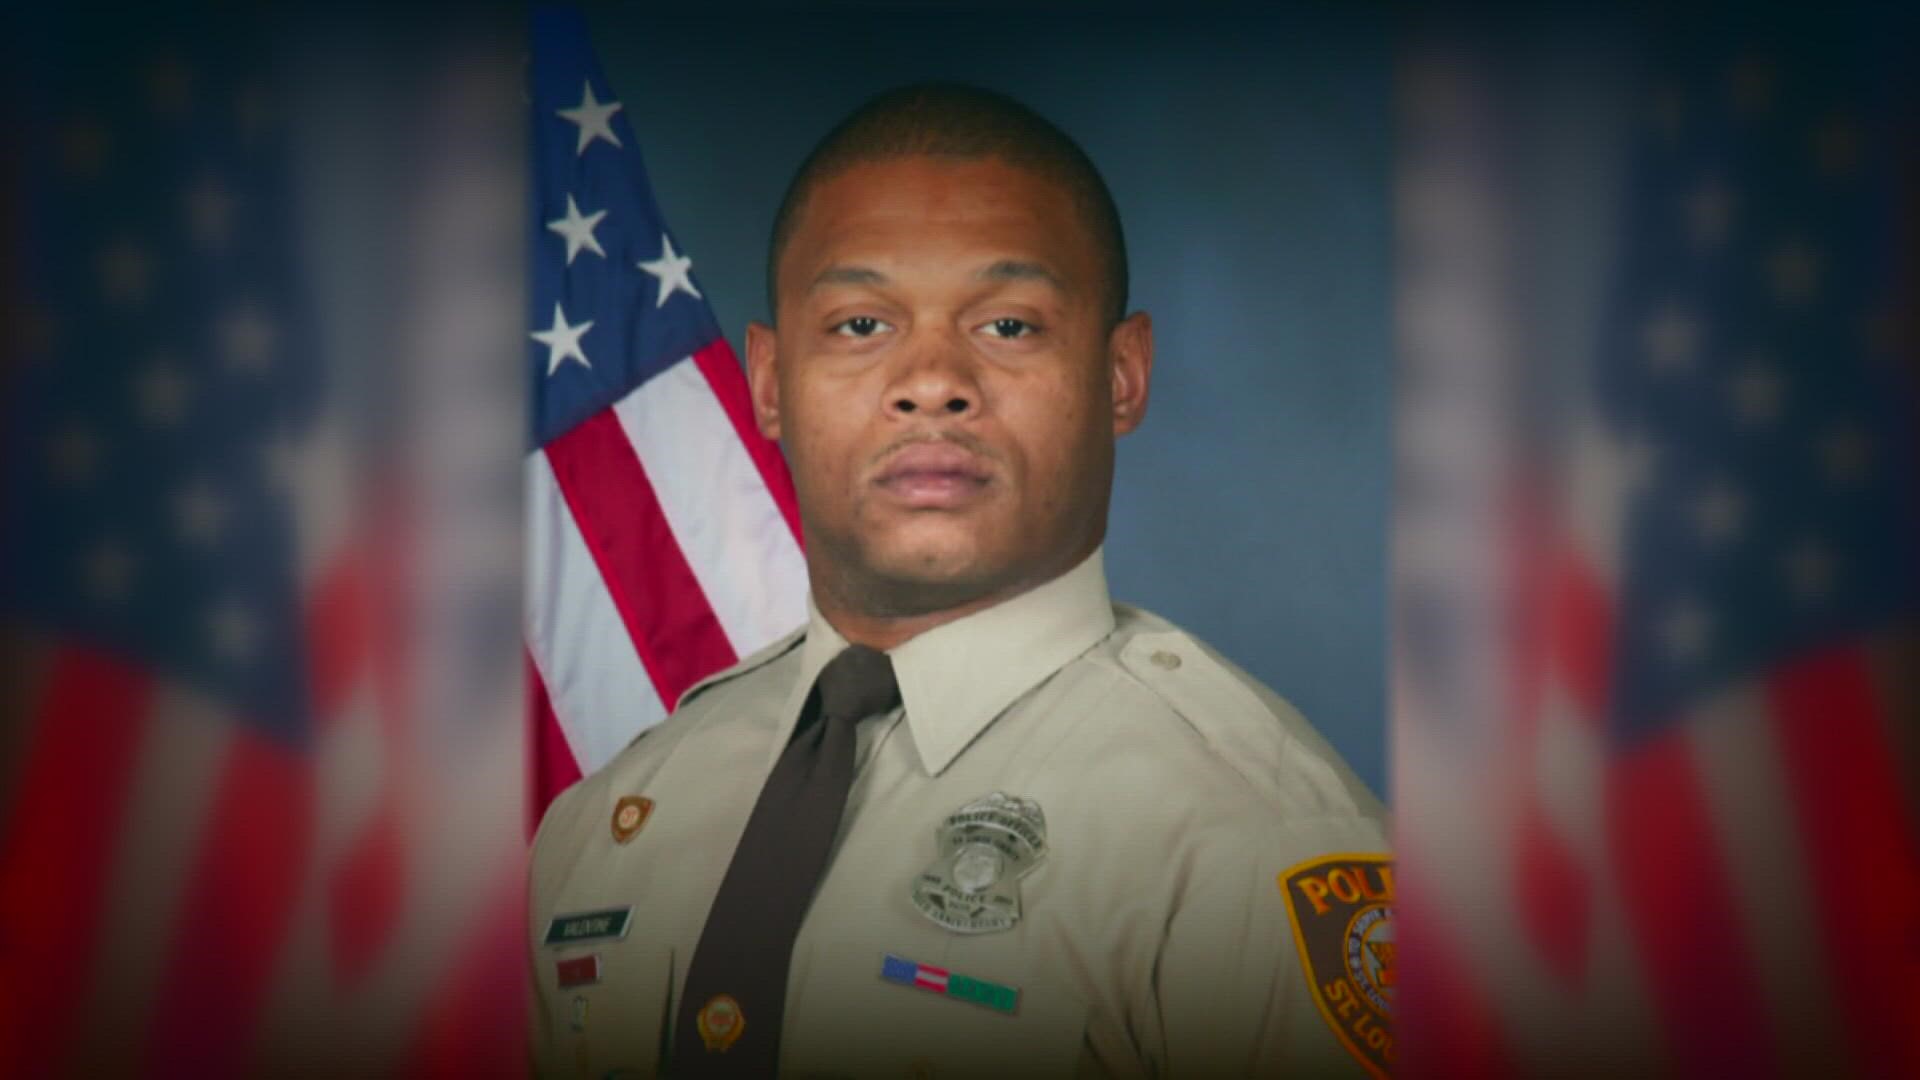 Dec. 1 is the one-year anniversary of Detective Antonio Valentine's line-of-duty death. The Bella Fontaine Shelter will be renamed in his honor.